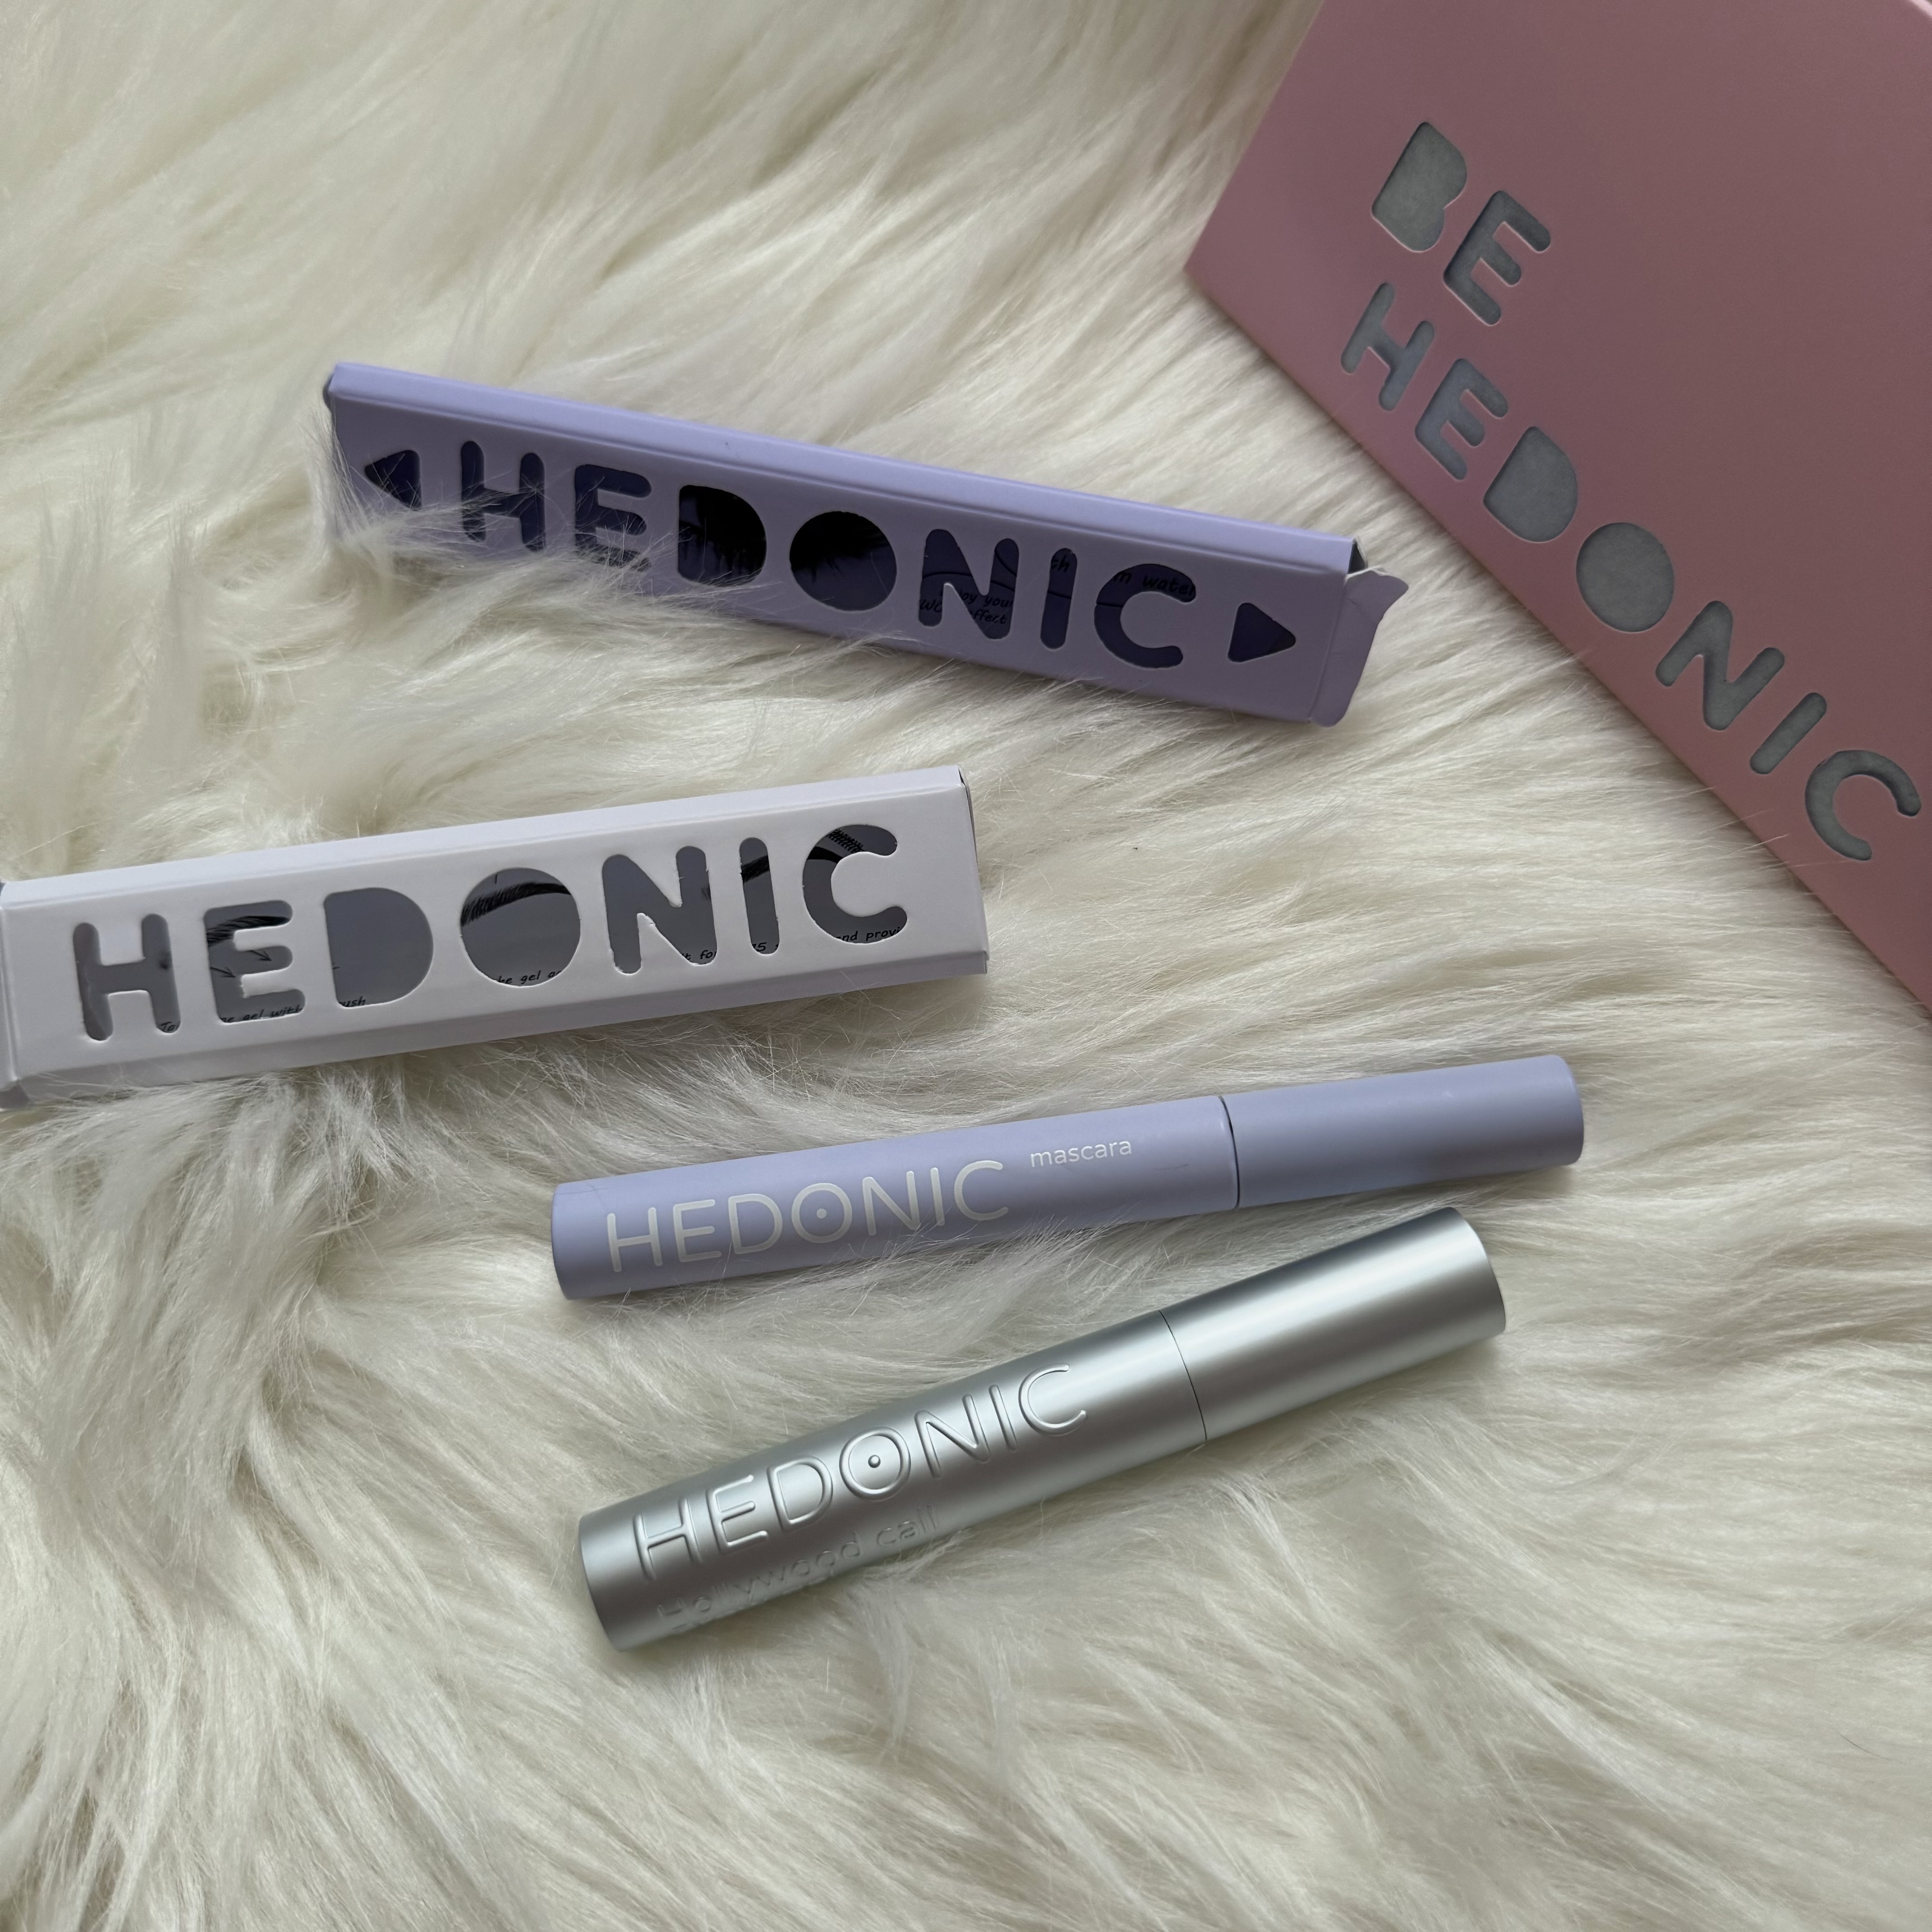 HEDONIC HOLLYWOOD CALL CLEAR BROW GEL